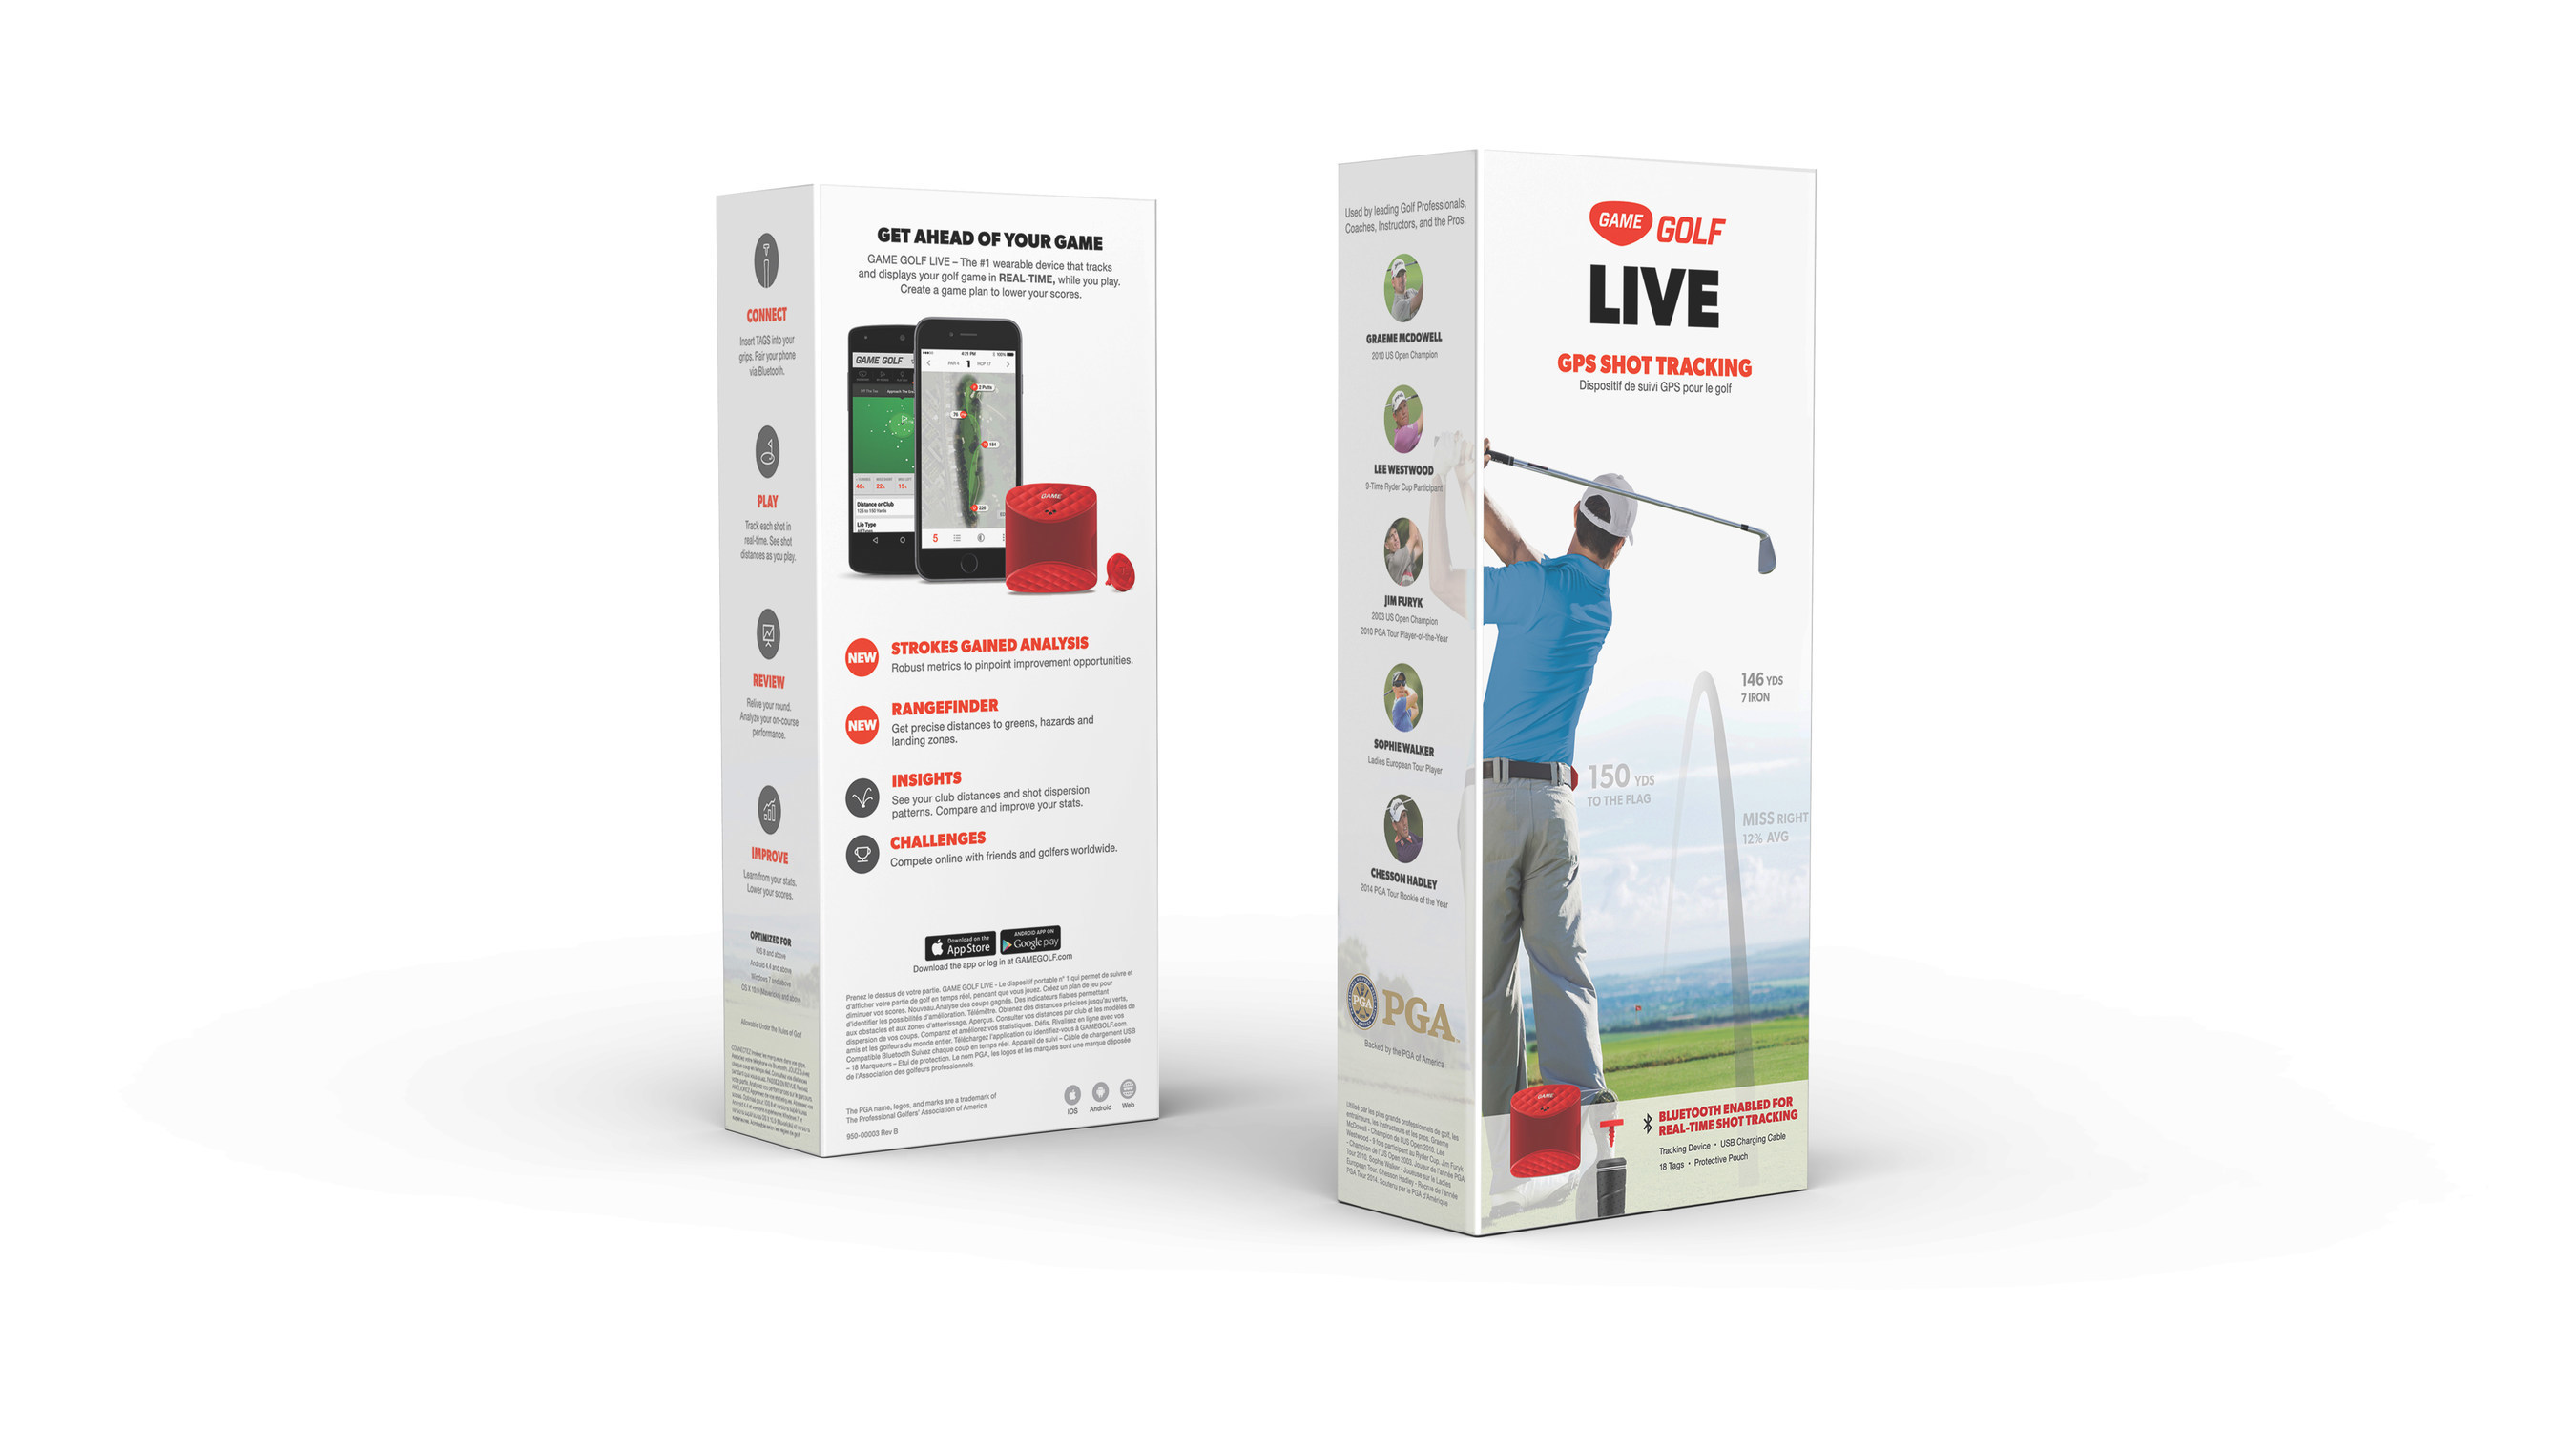 Next-generation real-time golf shot-tracker, new GAME GOLF LIVE, arrives in stores November 9